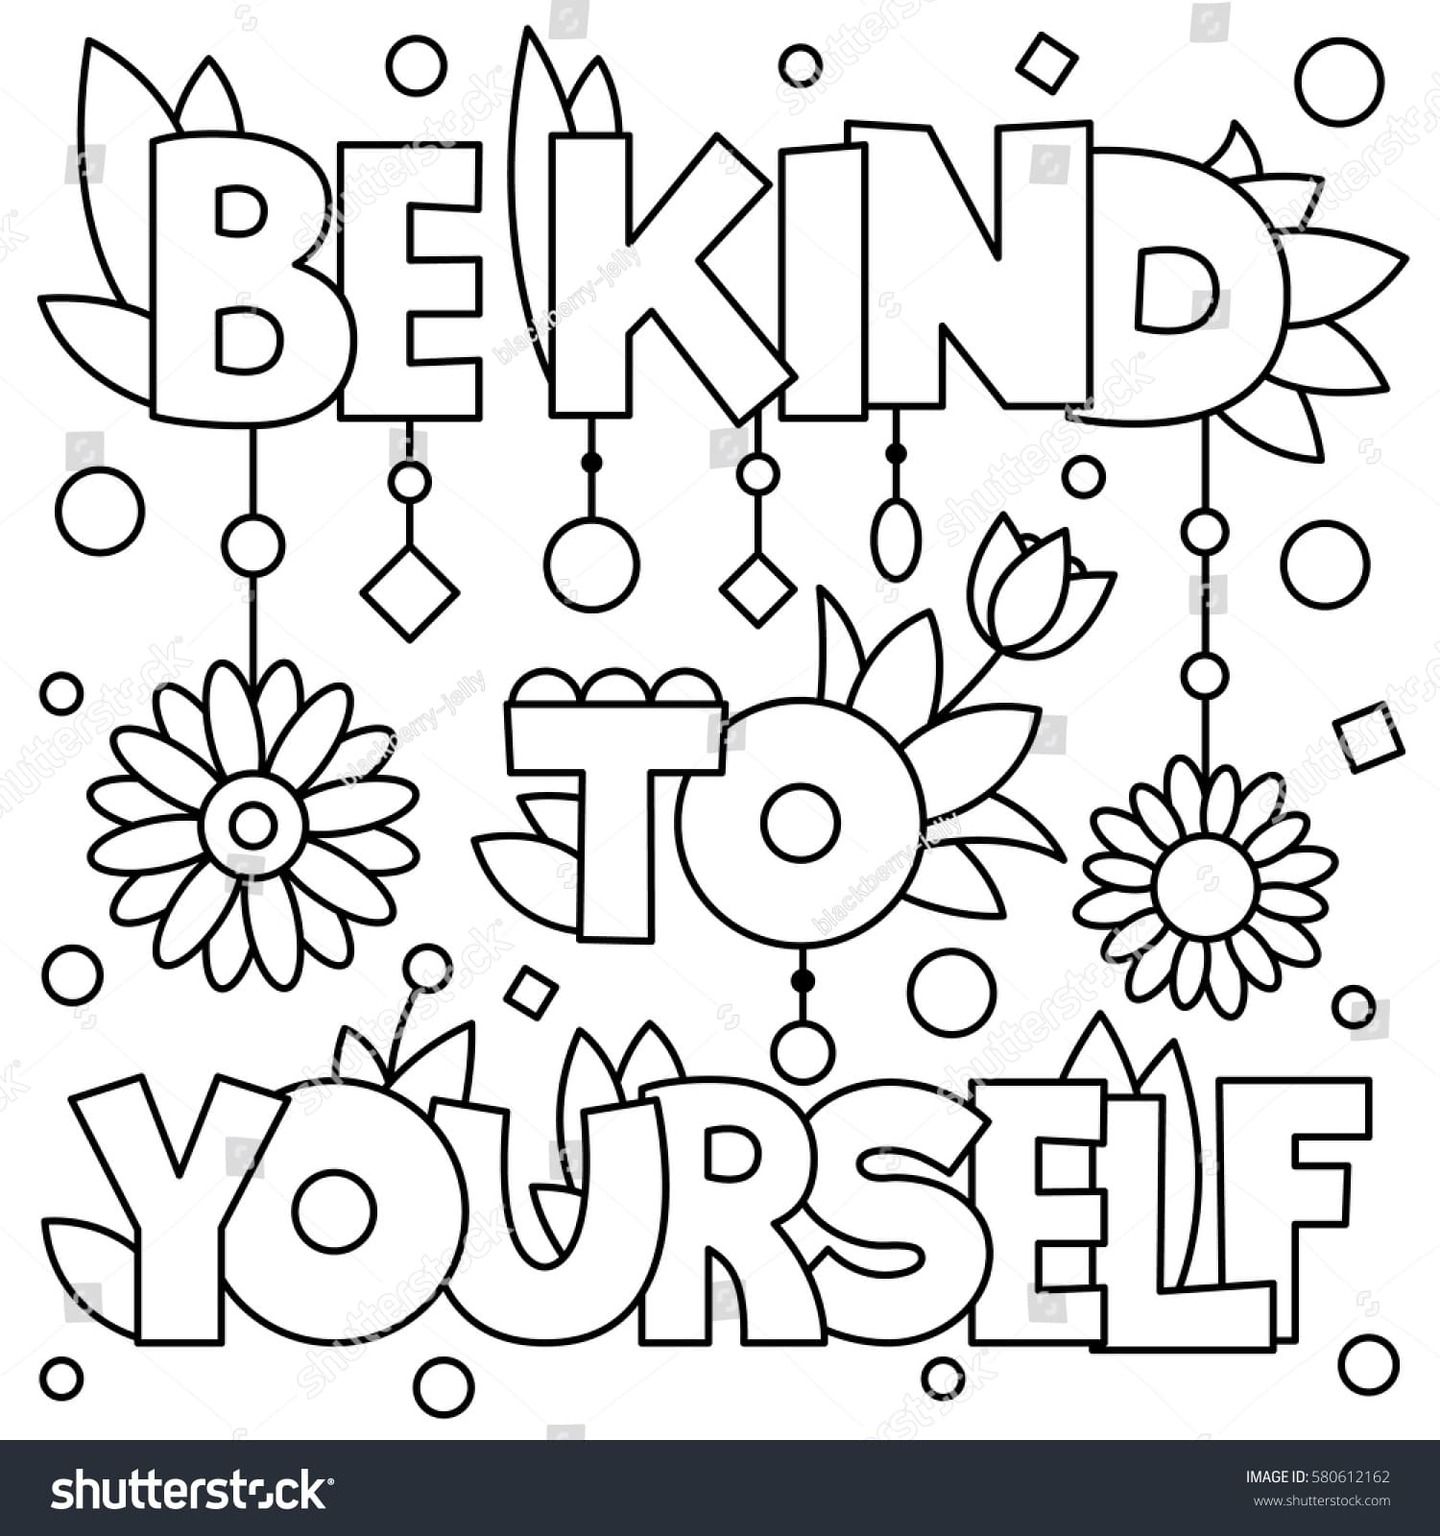 Printable kindness coloring pages for children or students